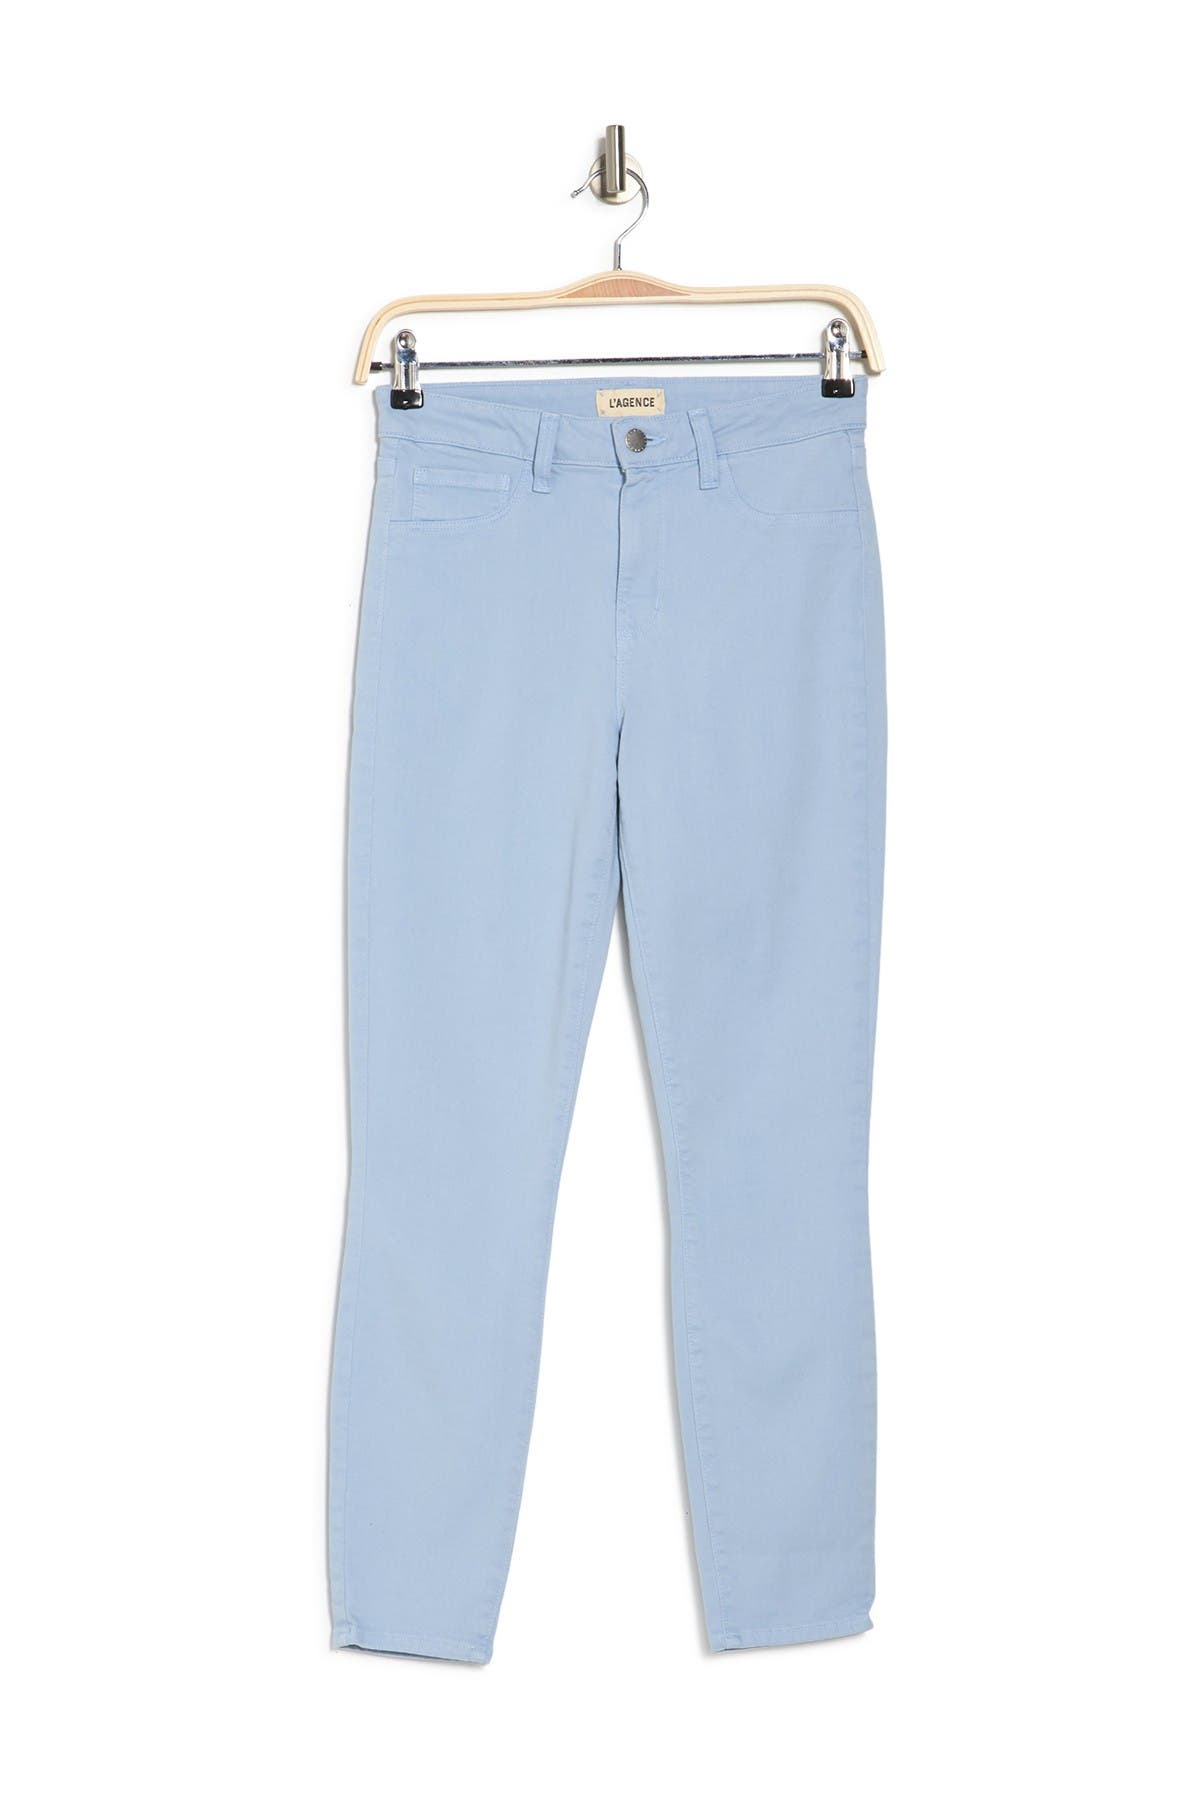 L Agence Marguerite High Waist Skinny Ankle Jeans In Sky Blue